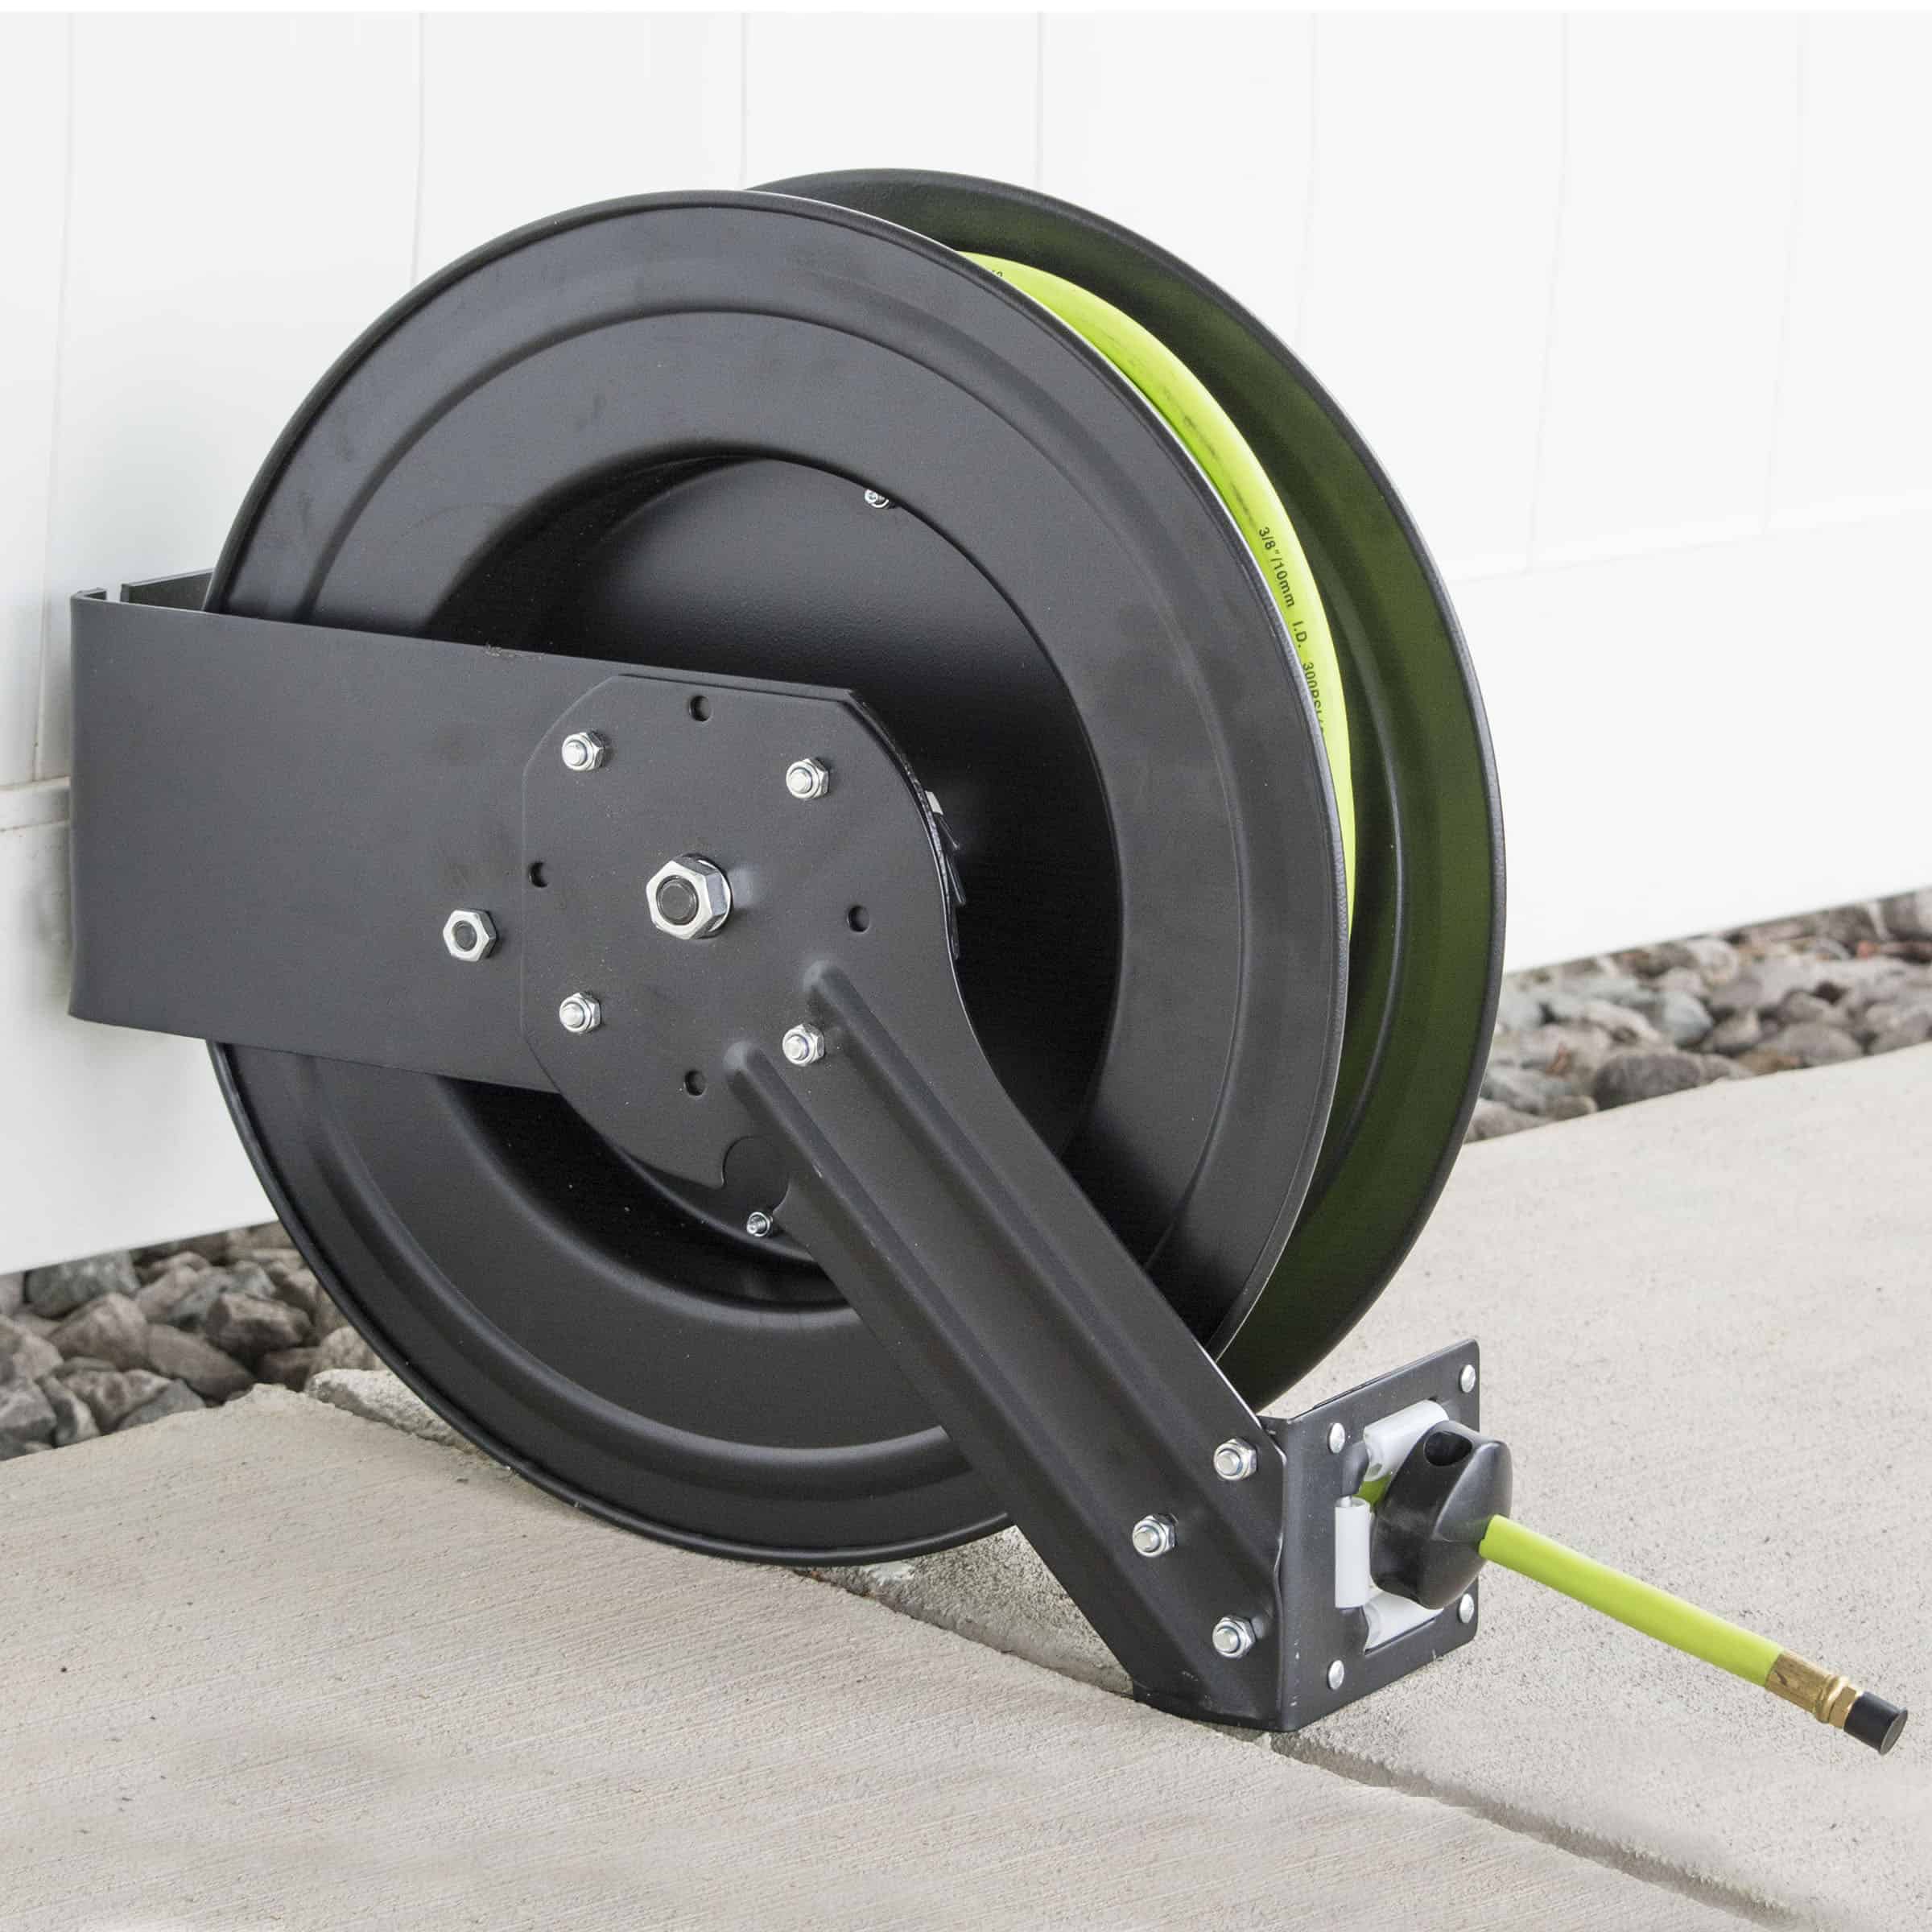 50 Foot Retractable Air Hose Reel with Auto Rewind - Black Bull